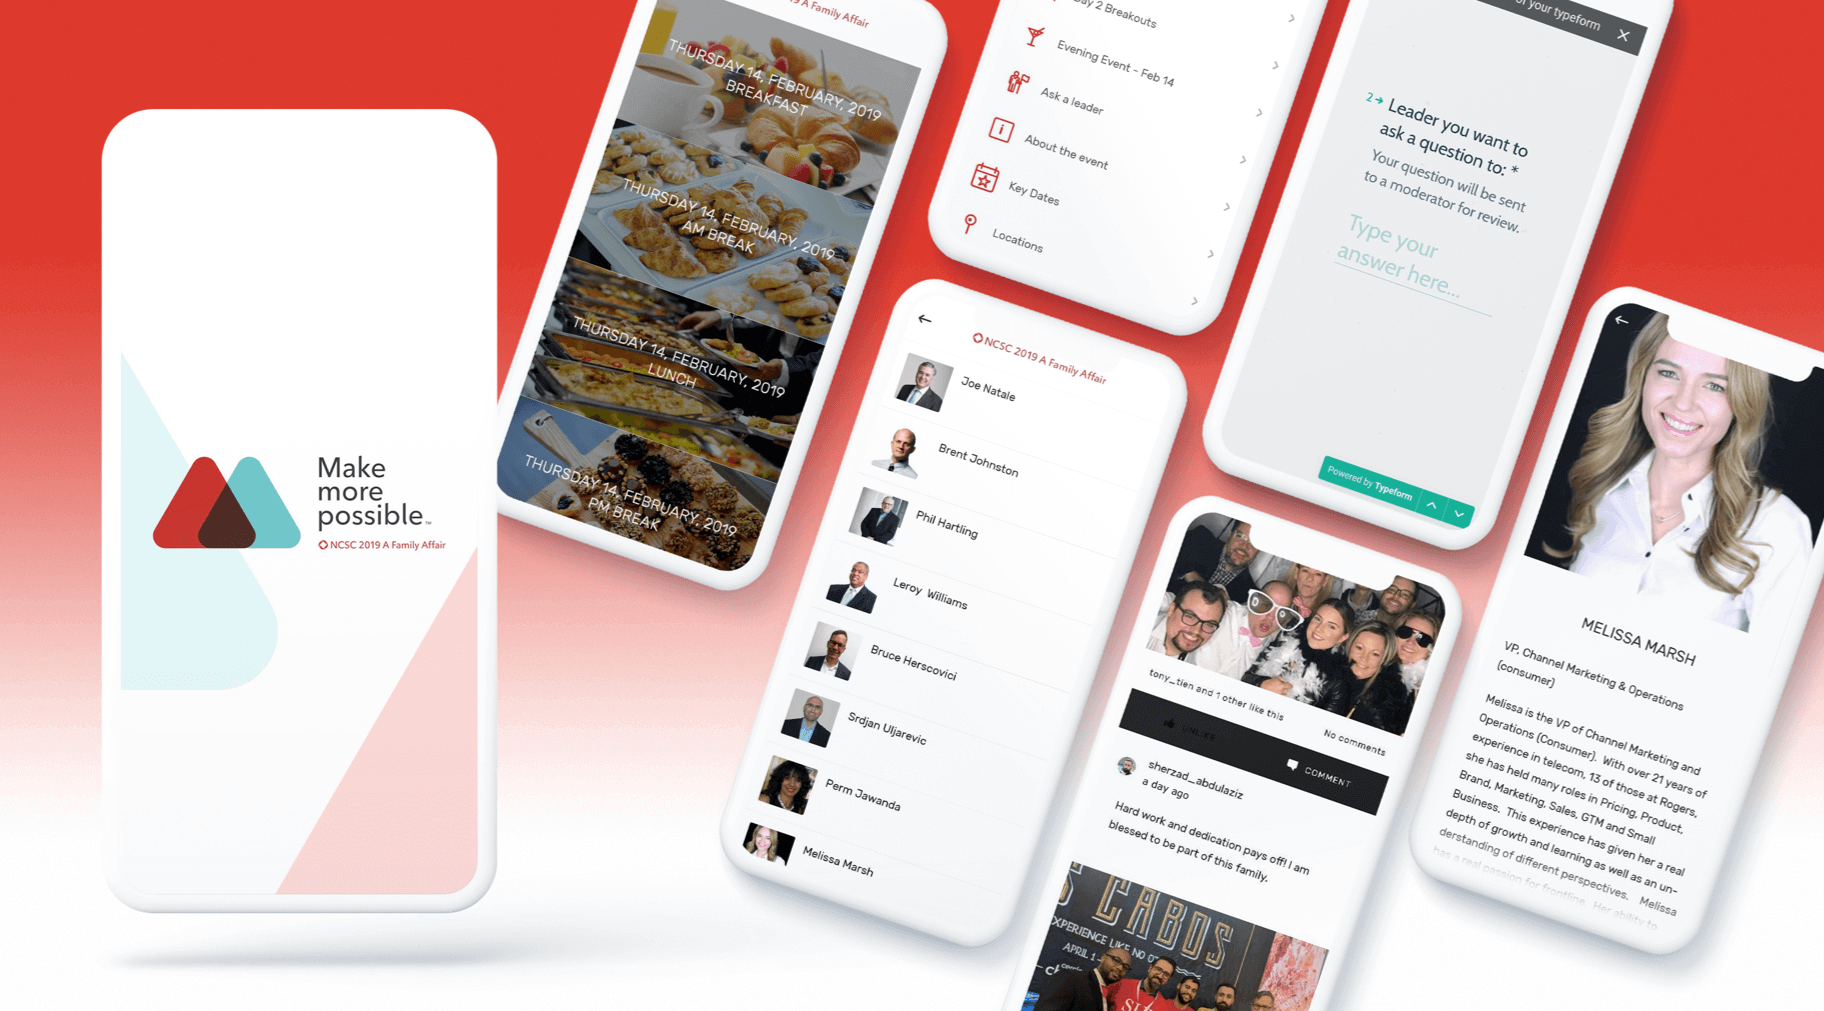 App interface developed by Elite Digital for a Rogers Communications event.